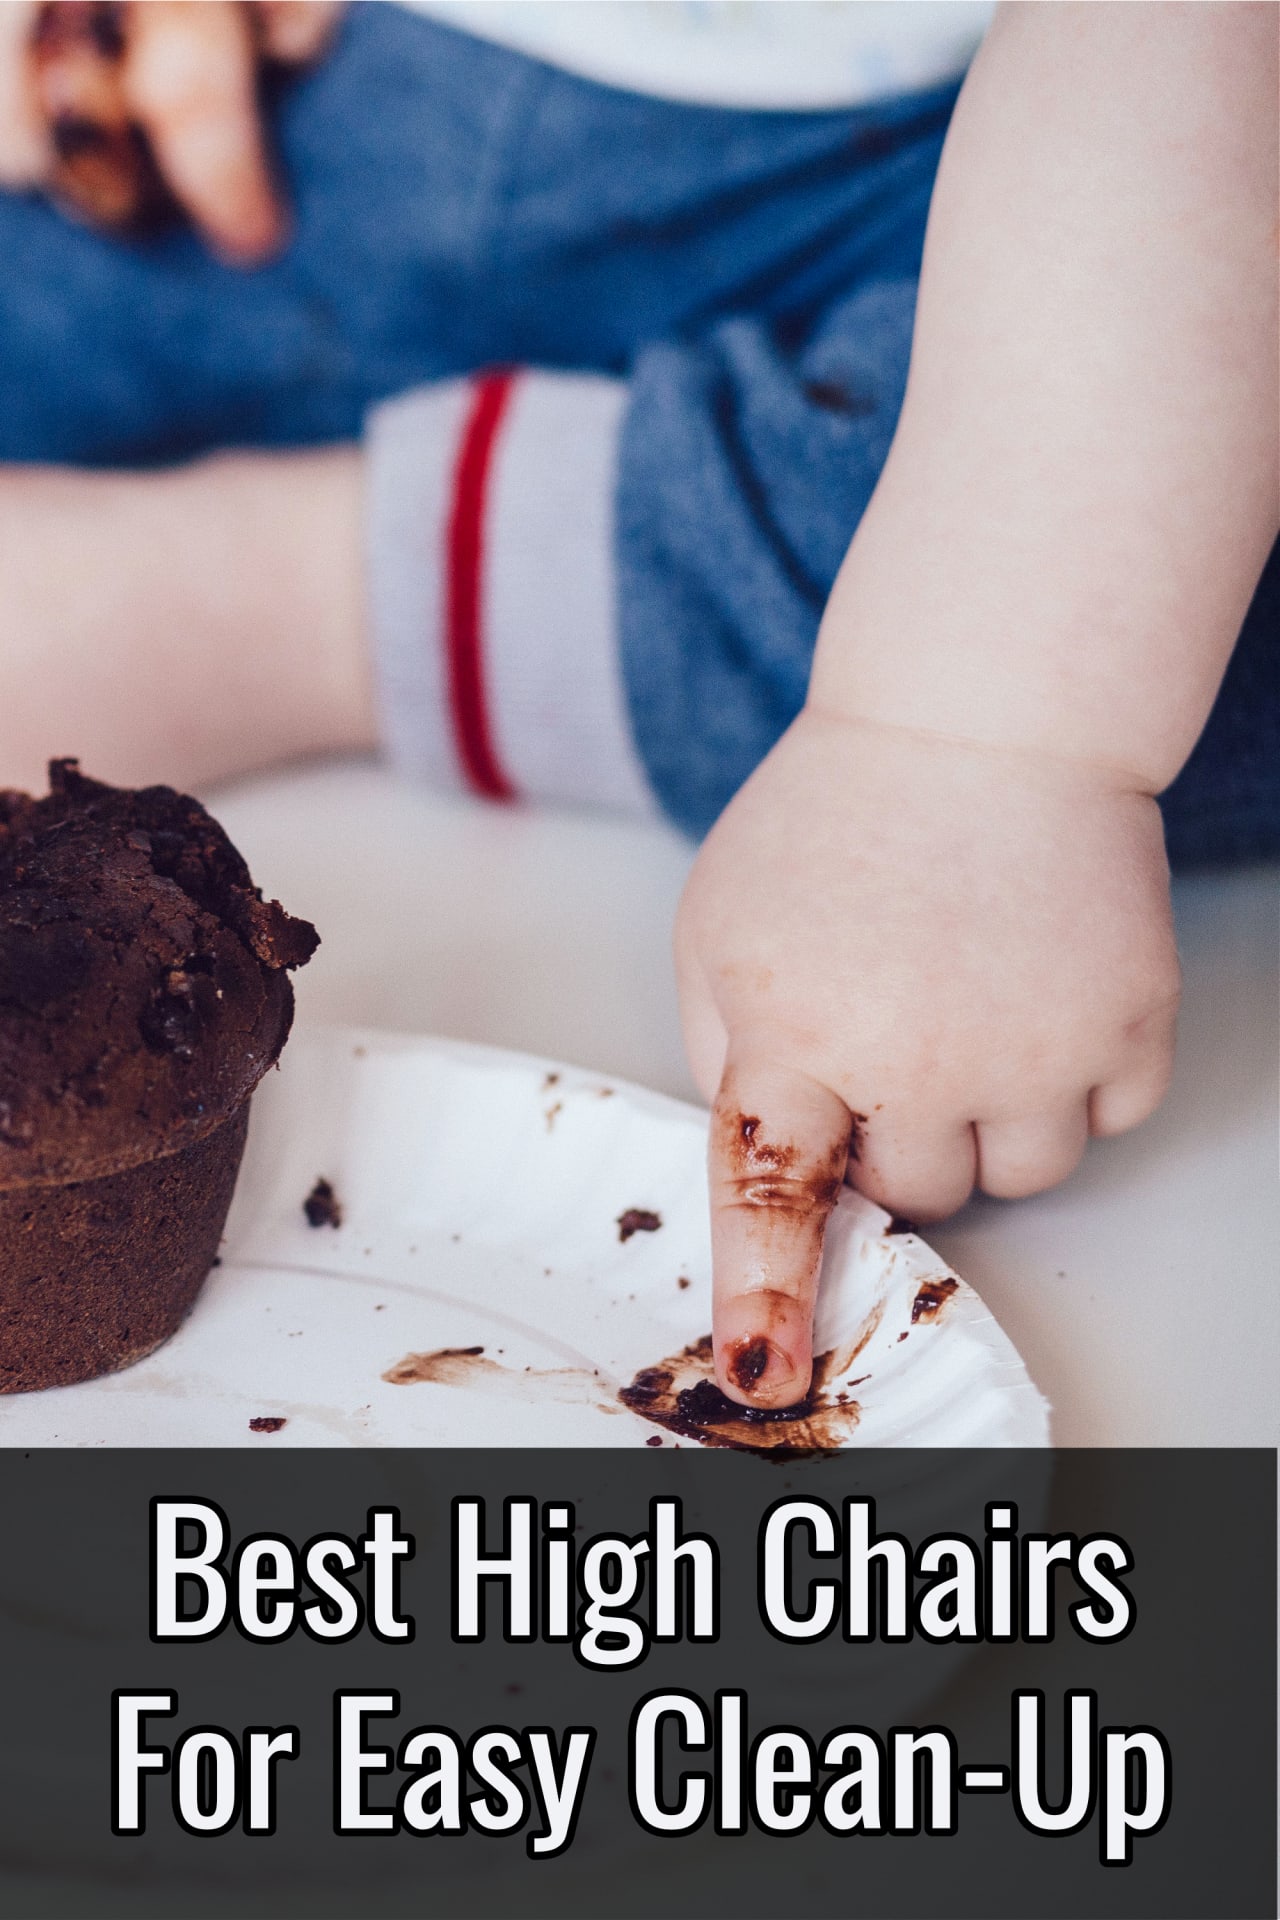 New Mom Advice:  Best High Chair for EASY Clean Up - starting baby on solids and first foods?  These easy to clean high chairs are mom favorites and great for small spaces